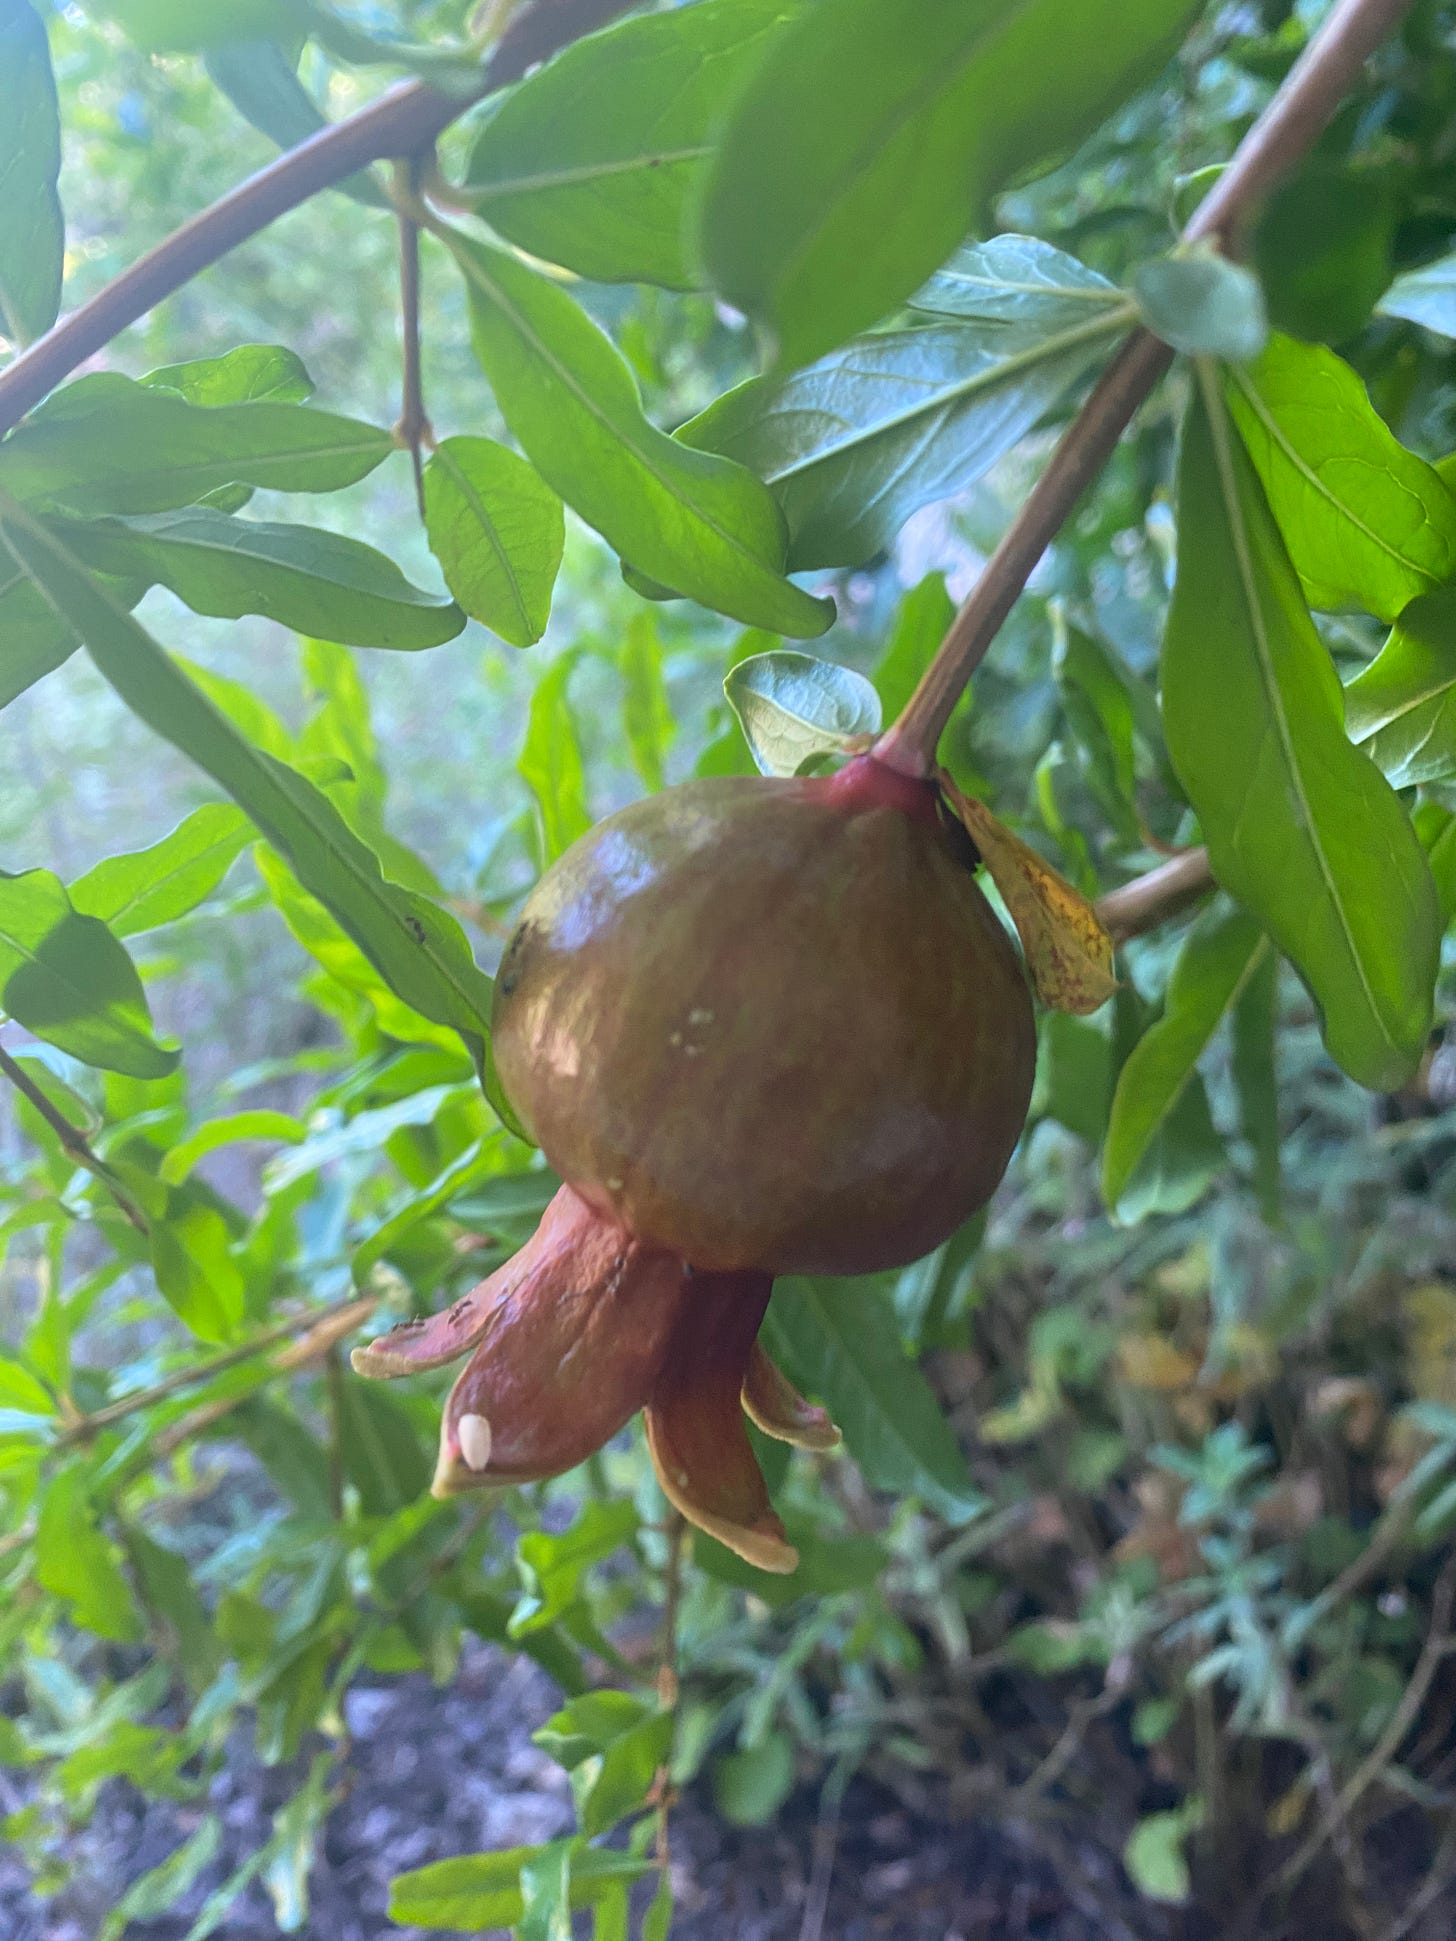 a pomegranate hangs on a green leafy branch